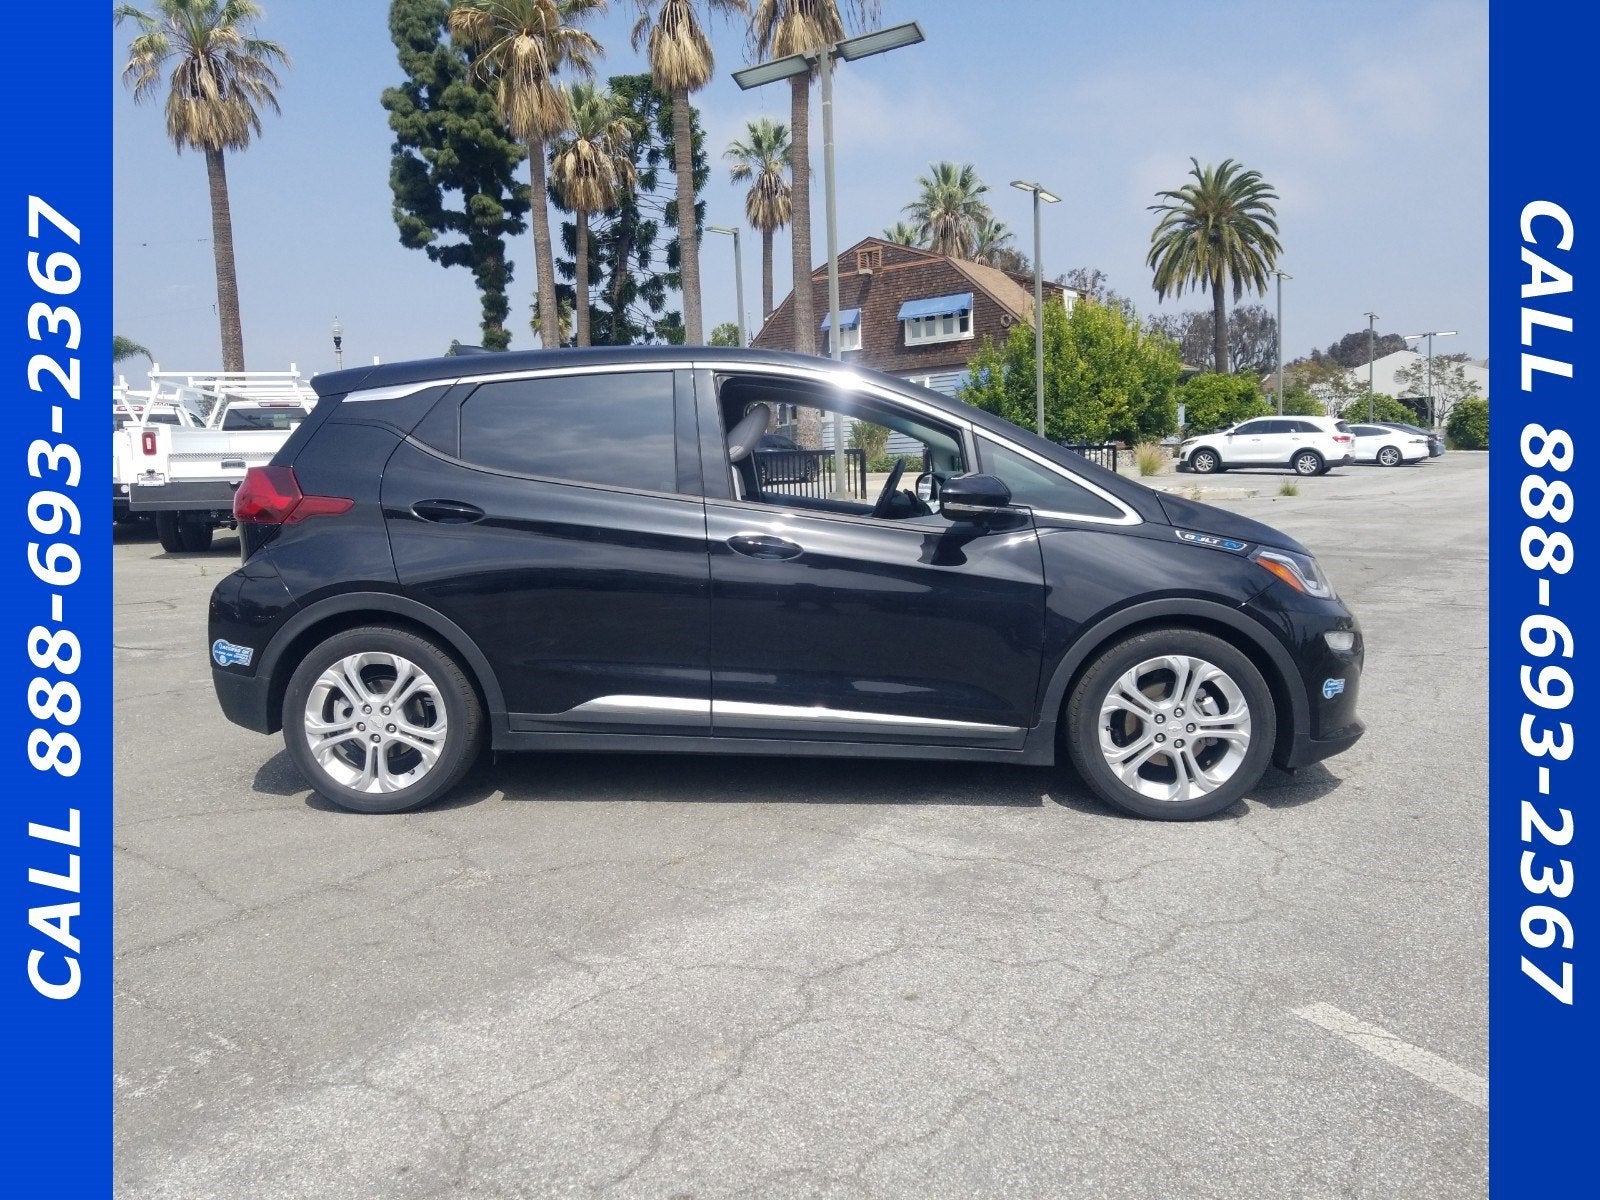 Used 2021 Chevrolet Bolt EV LT with VIN 1G1FY6S02M4104323 for sale in Upland, CA